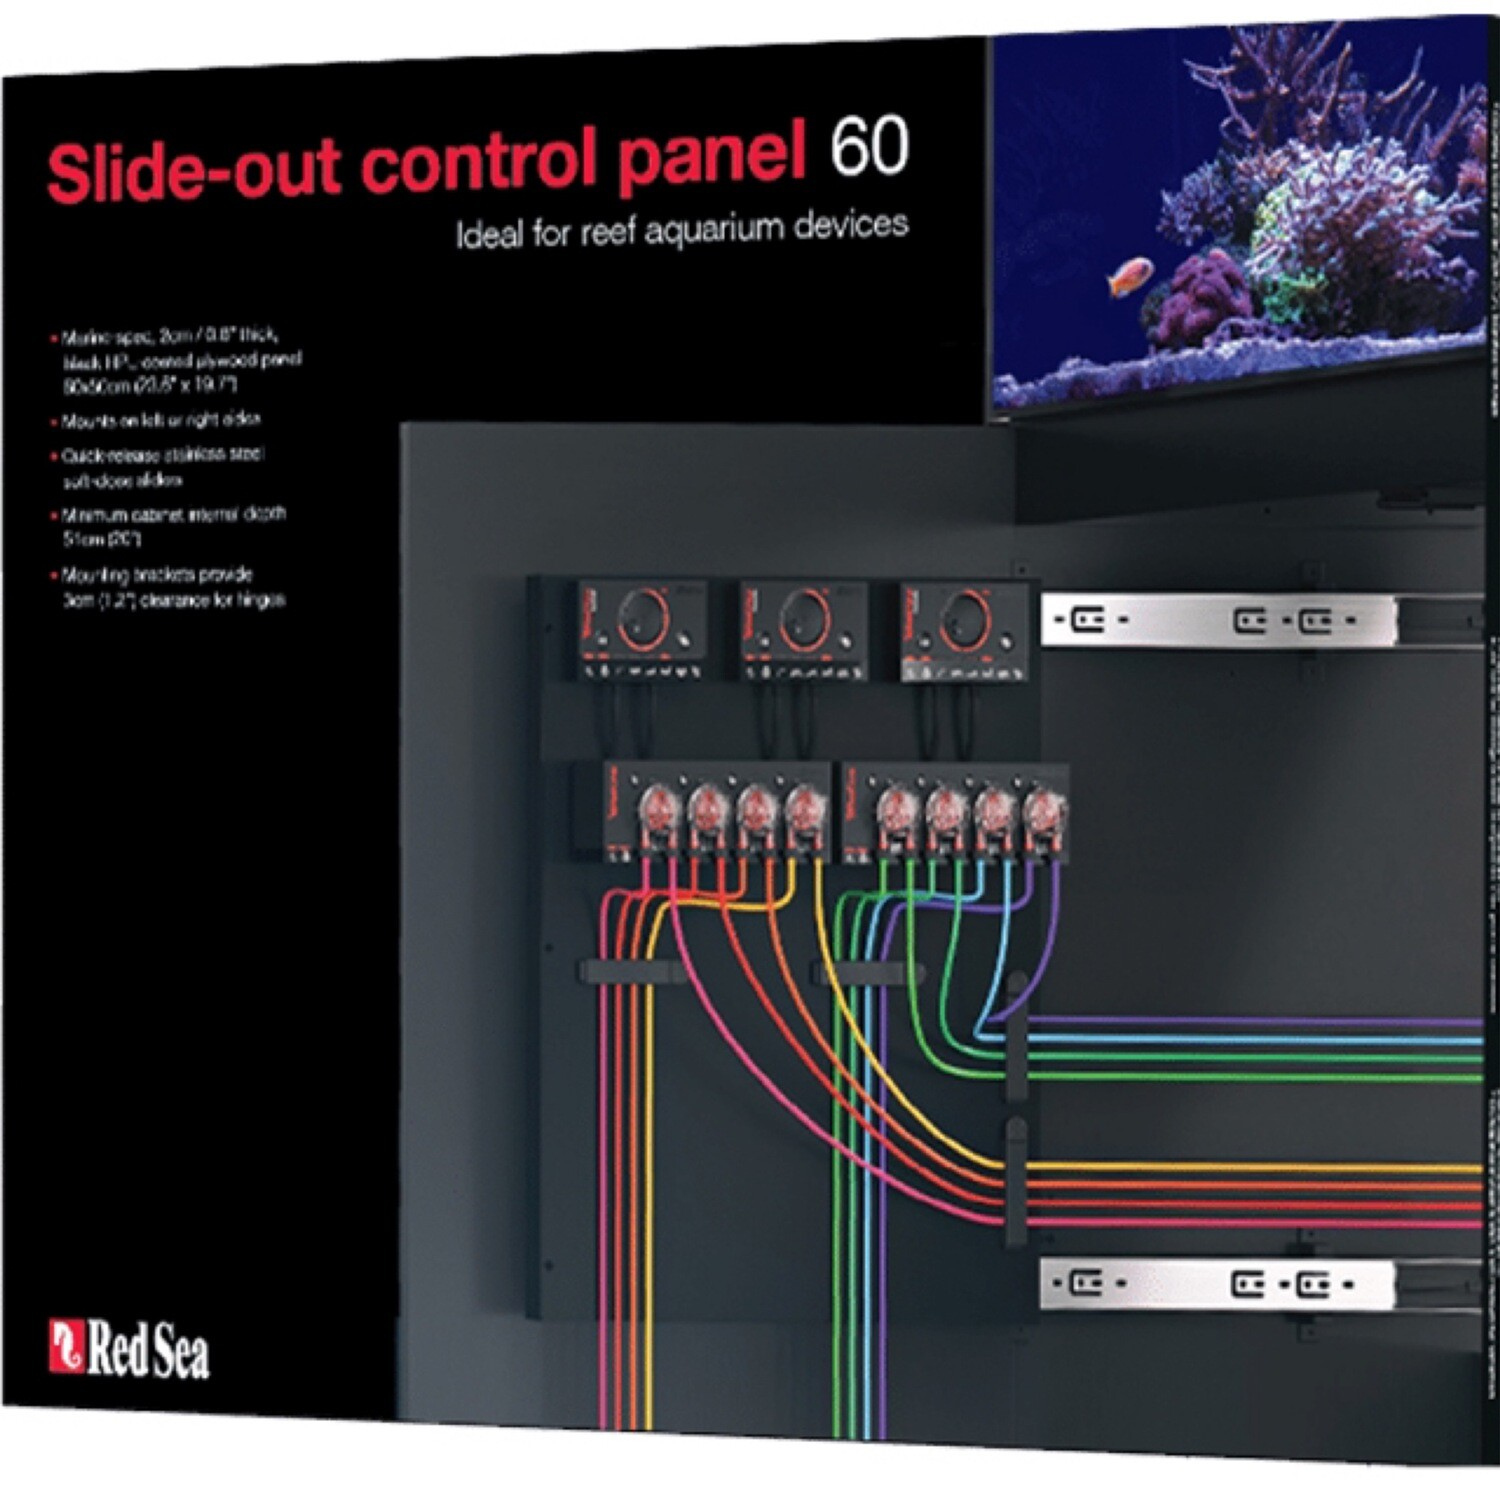 Red Sea Slide-out Control Panel 60